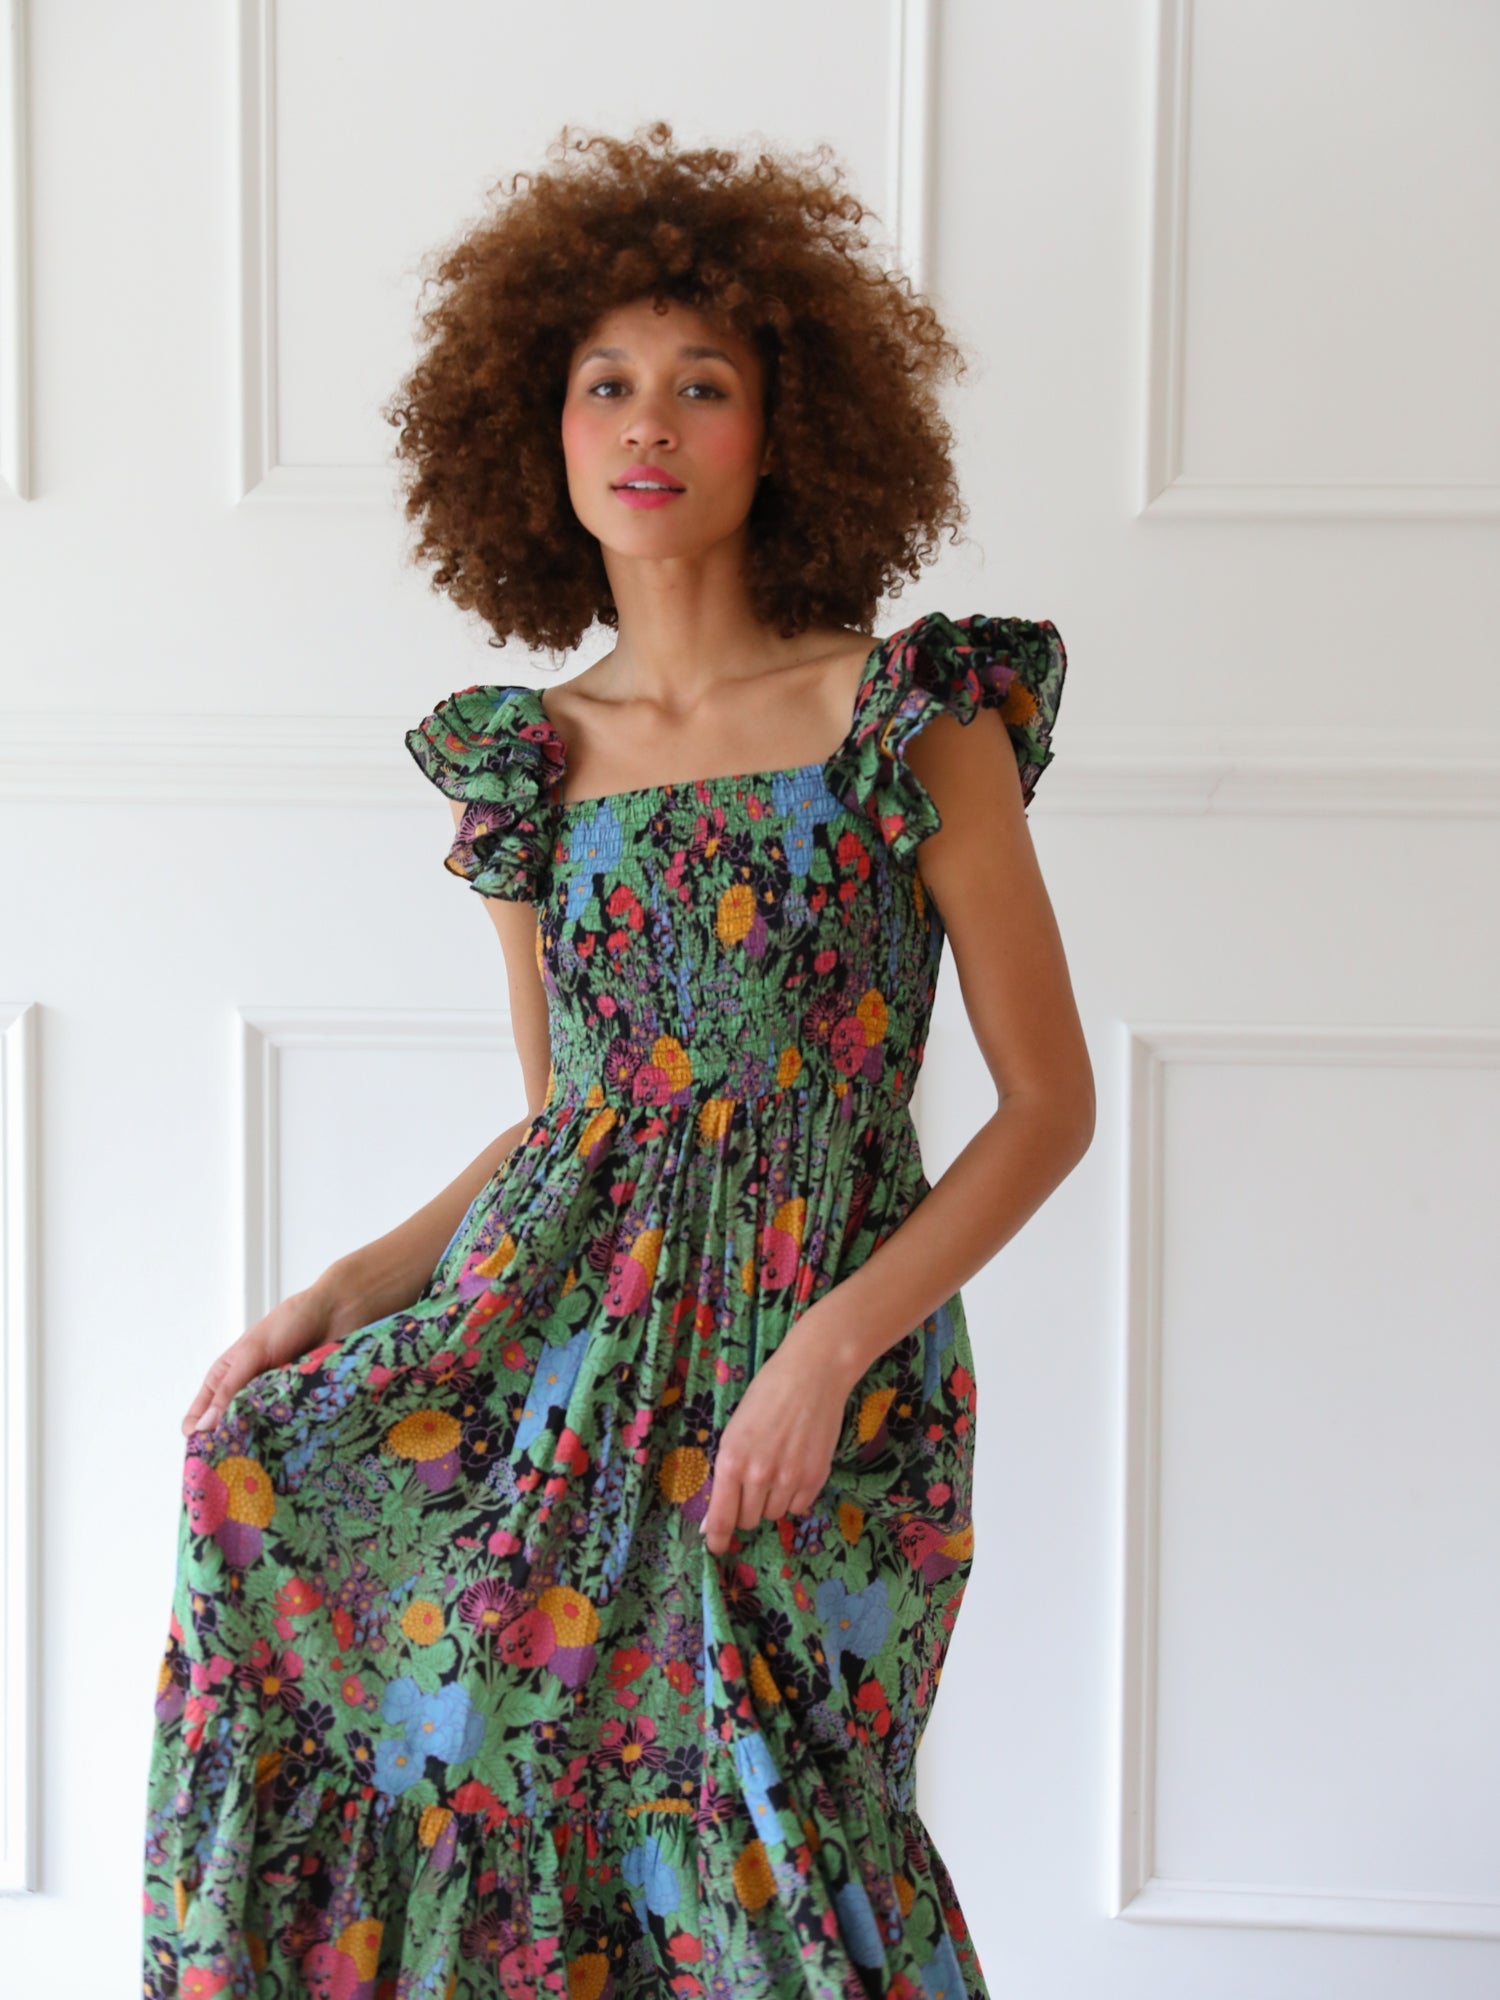 MILLE Clothing Olympia Dress in Botanica